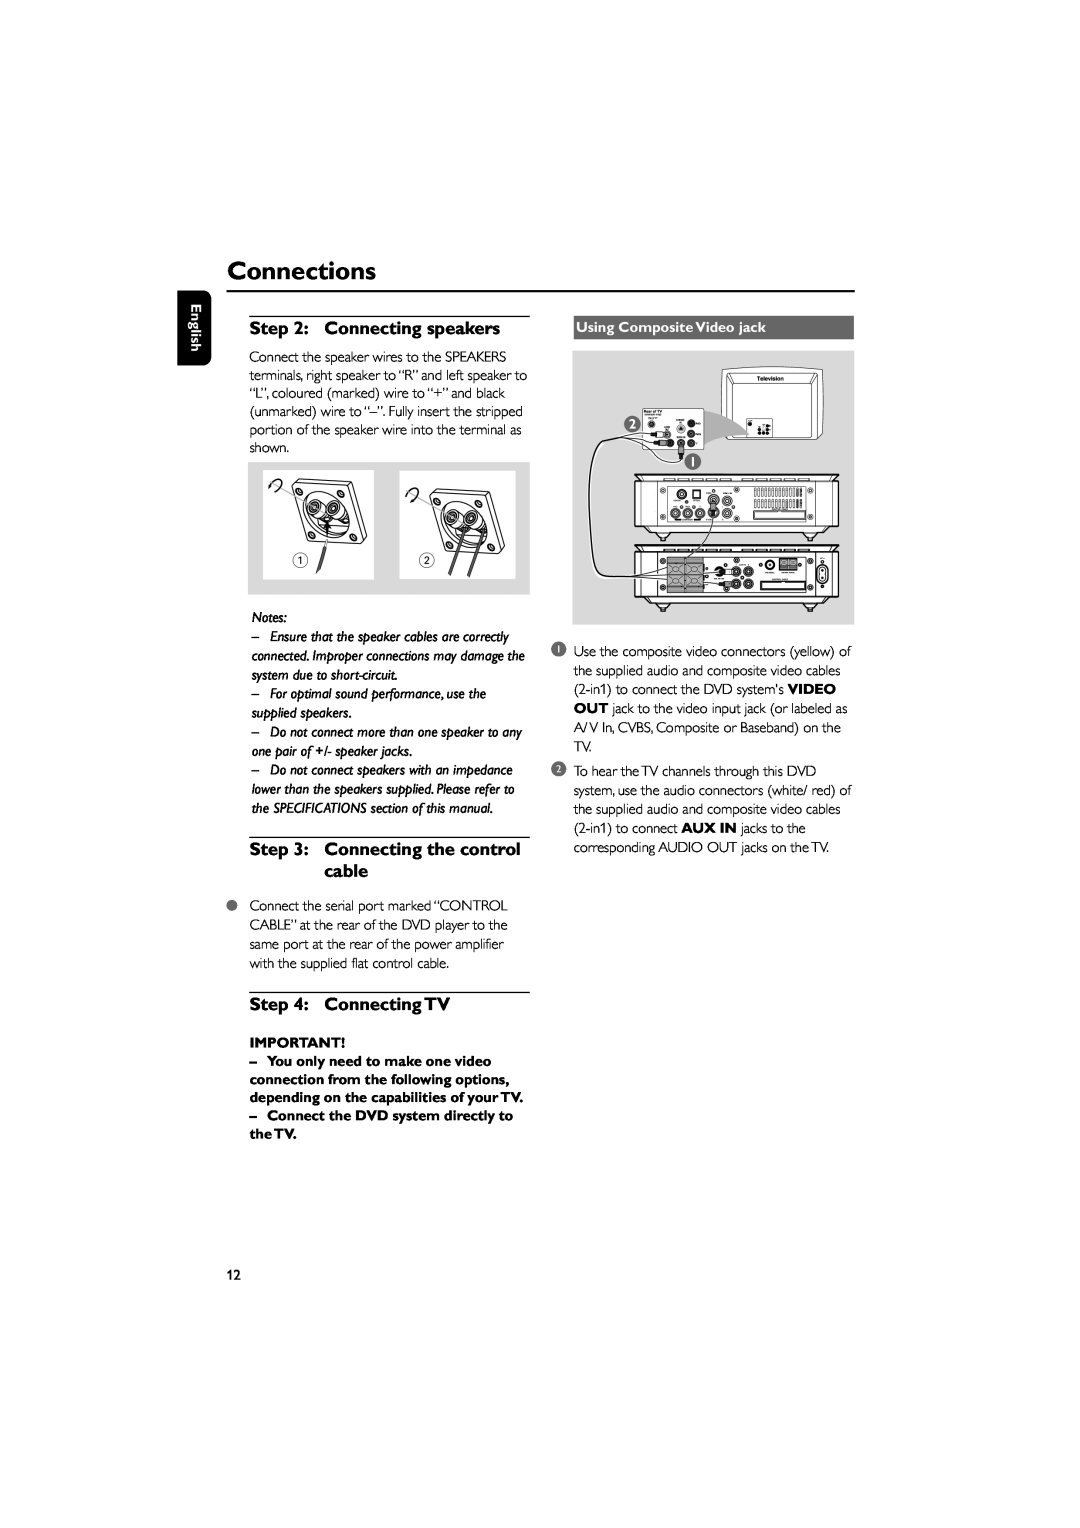 Philips MCD708 owner manual Connecting speakers, Connecting the control cable, Connecting TV, Connections, English 